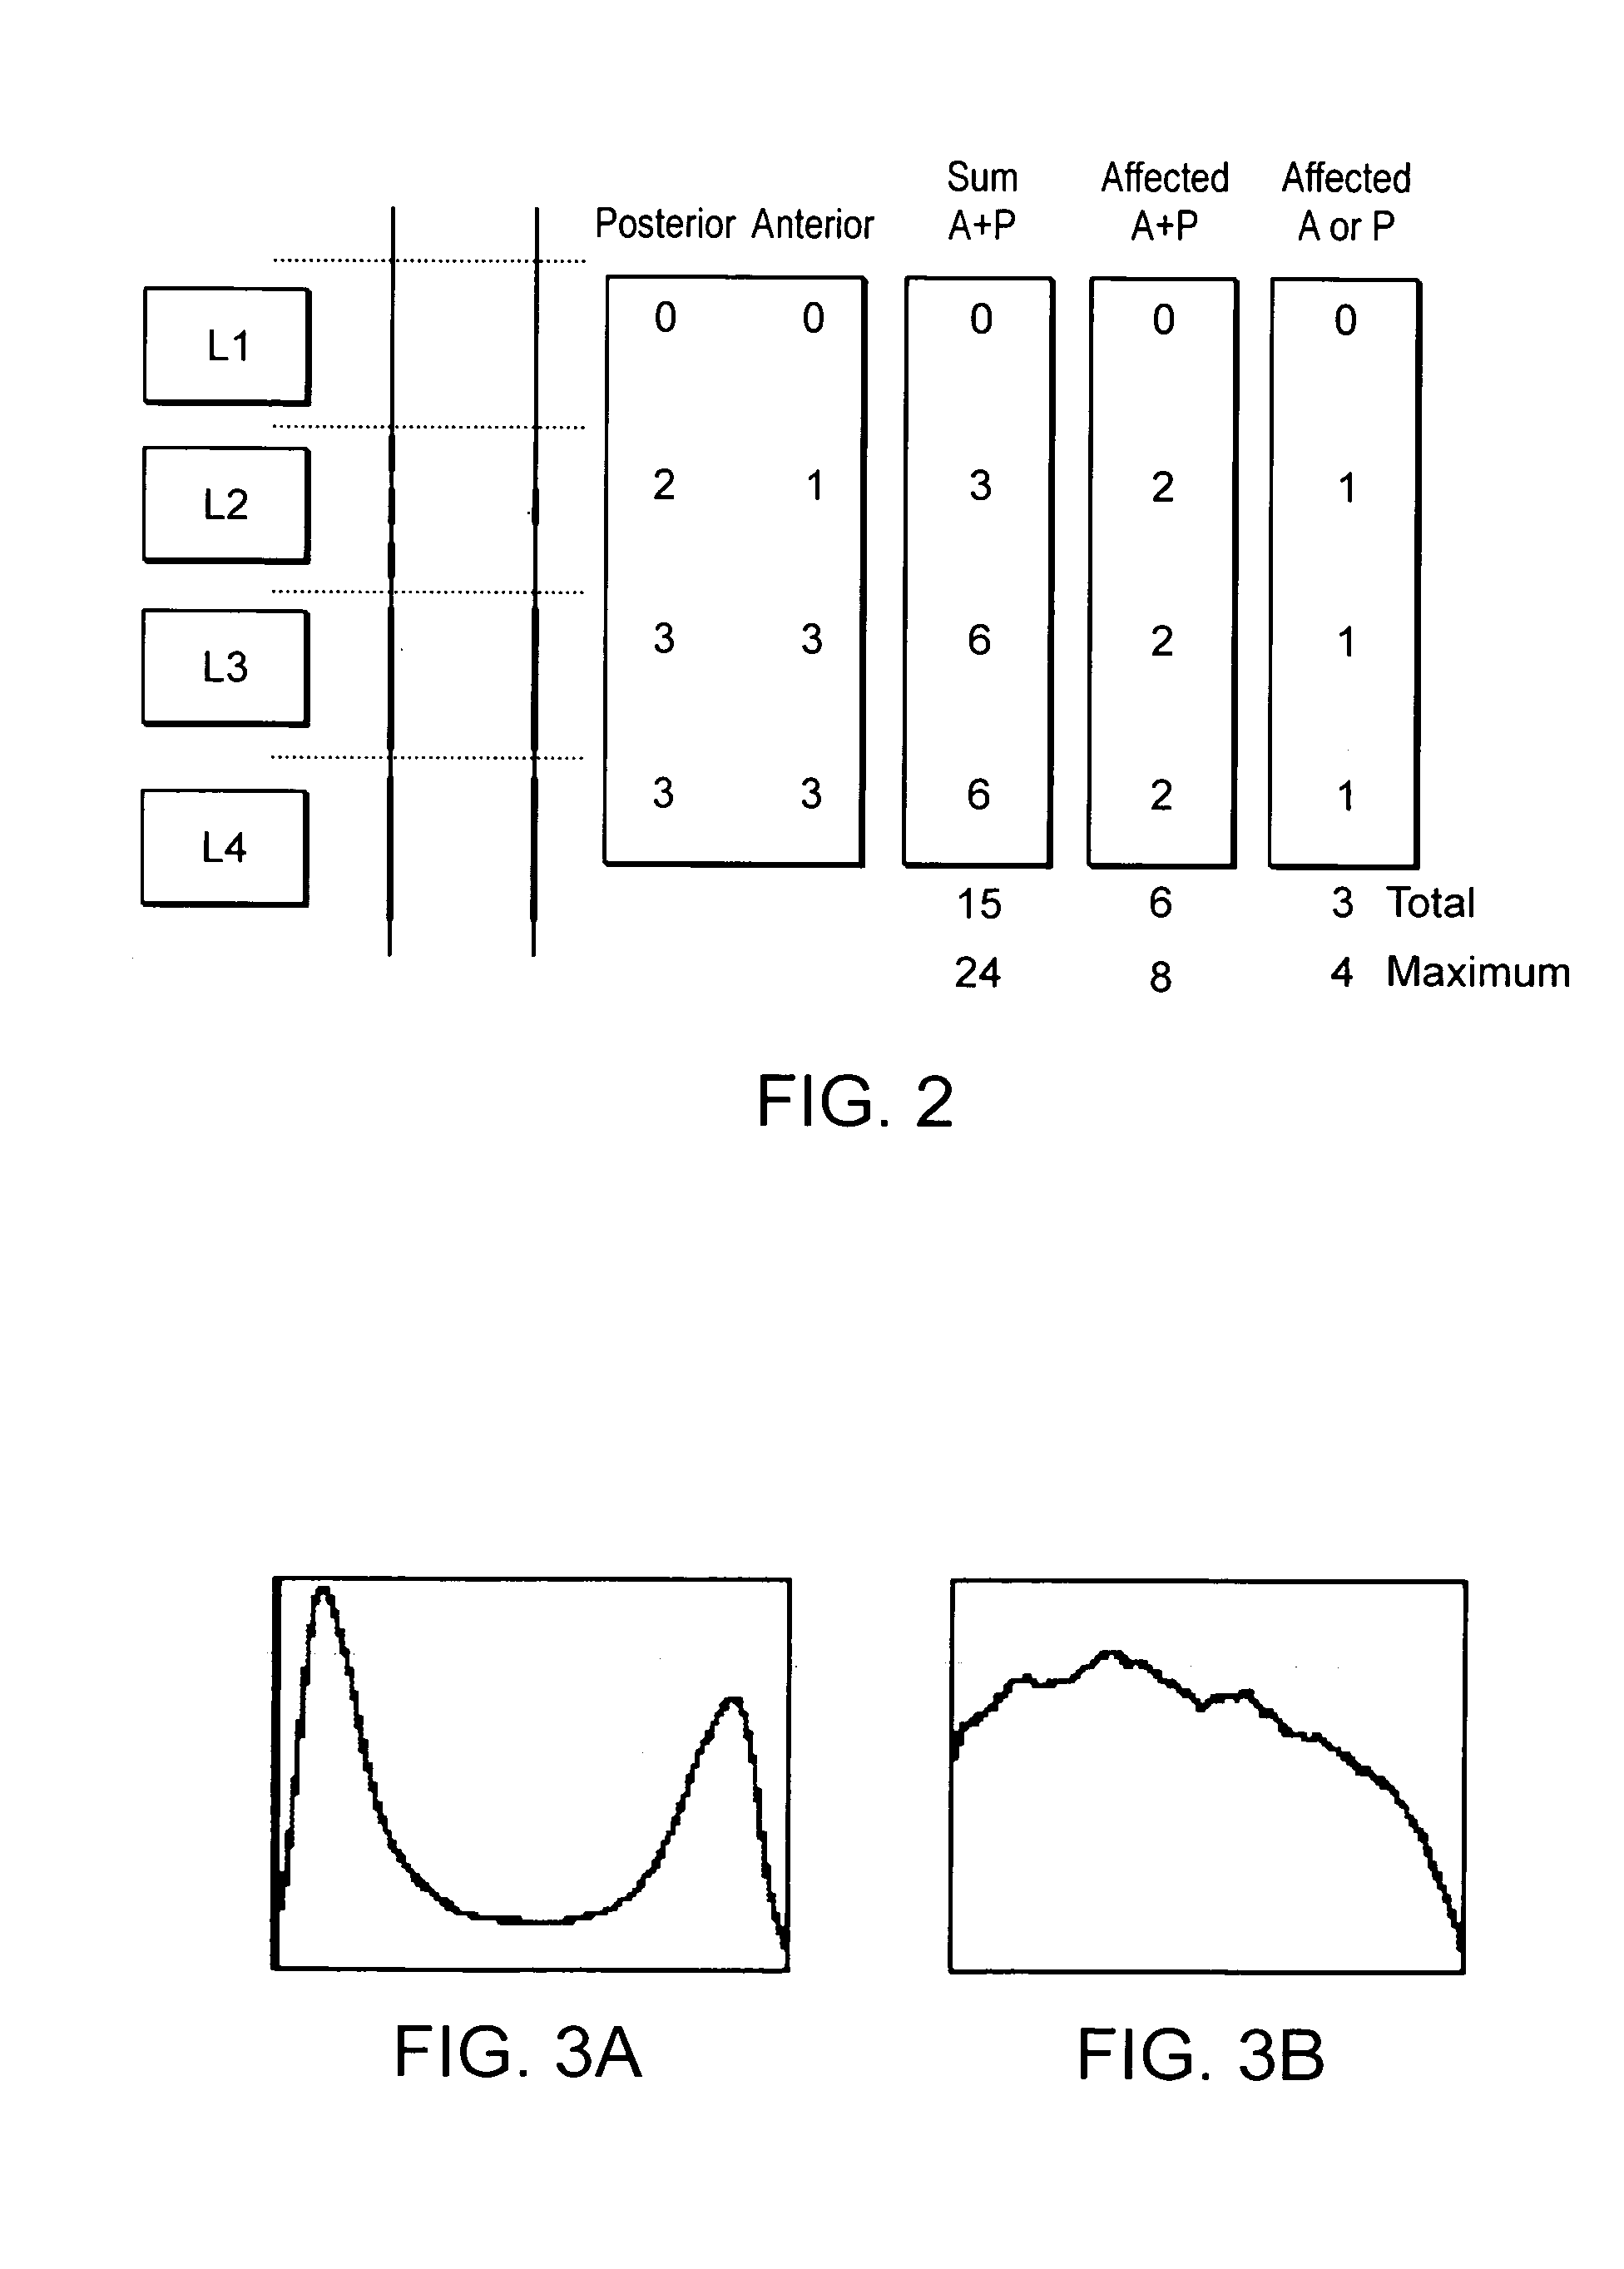 Method of deriving a quantitative measure of a degree of calcification of an aorta